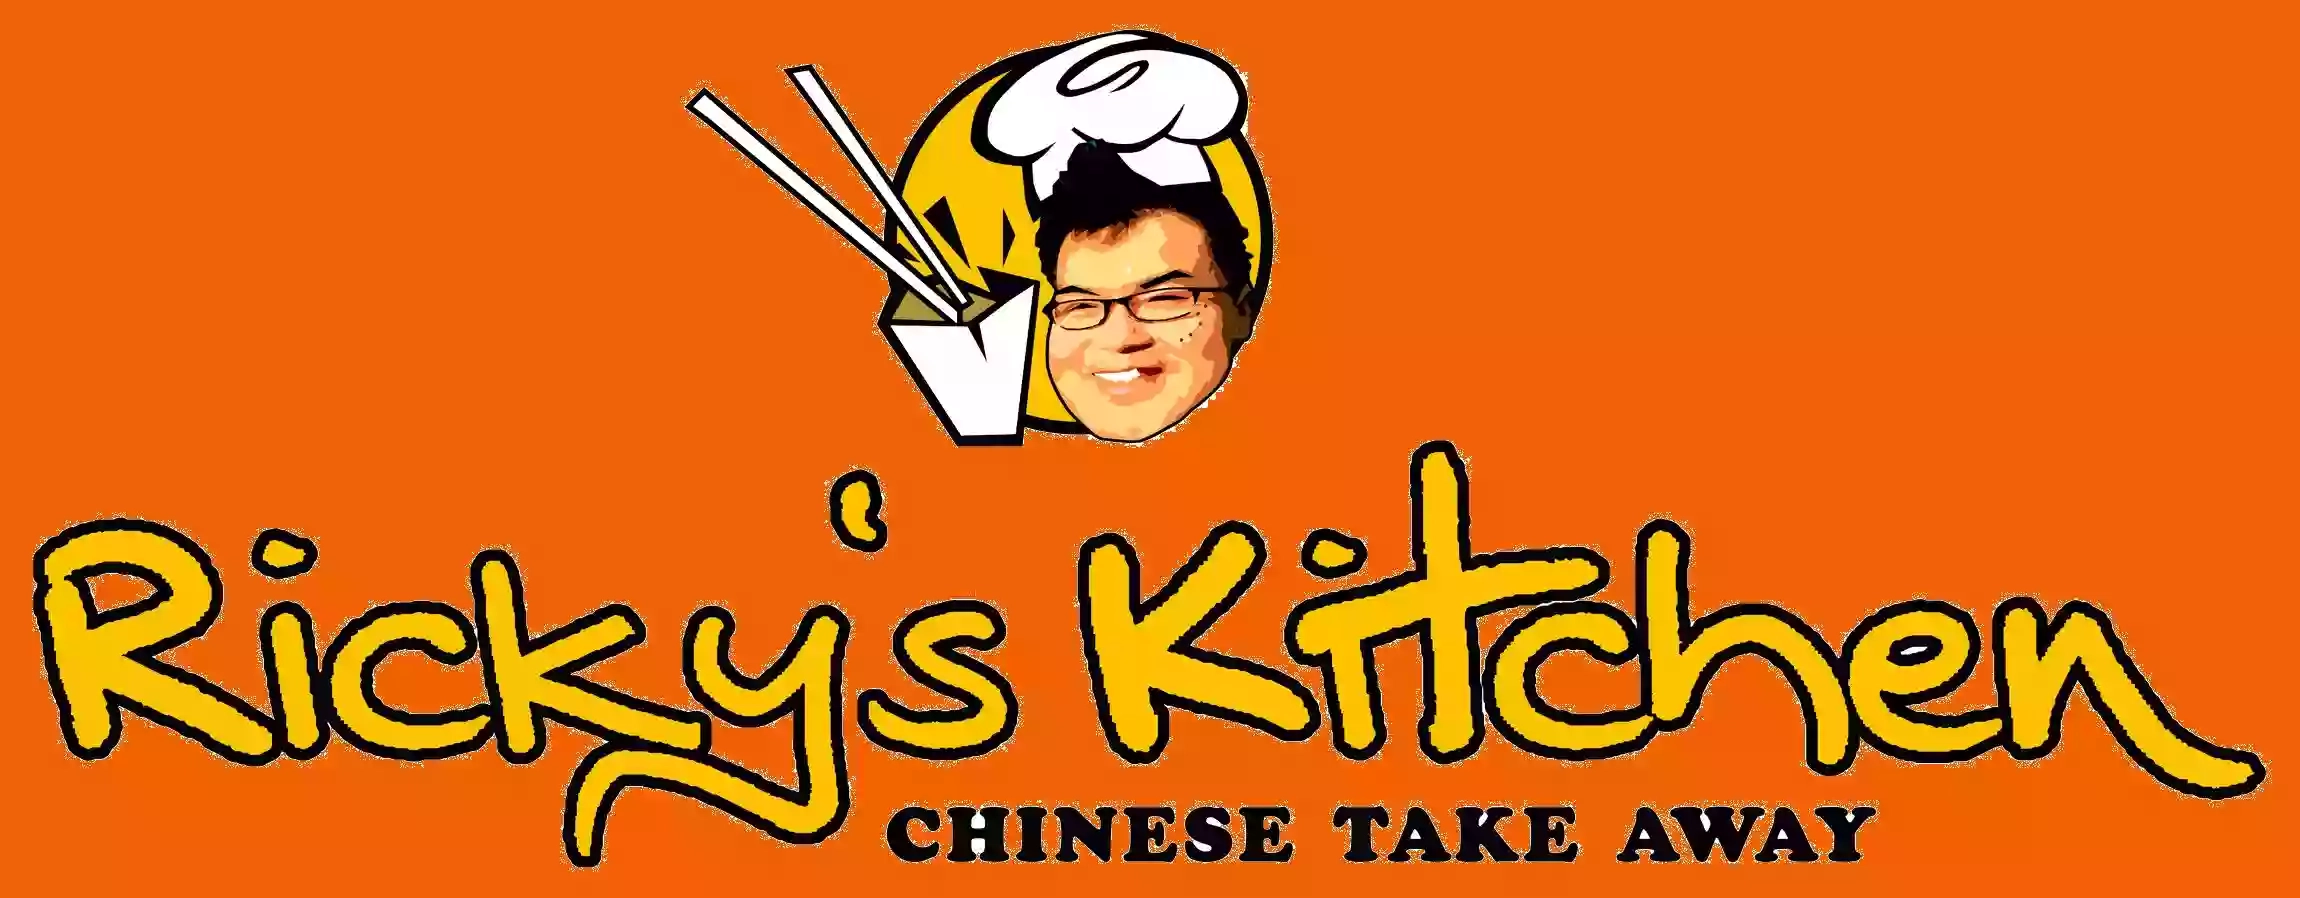 Ricky's Kitchen Chinese Takeaway